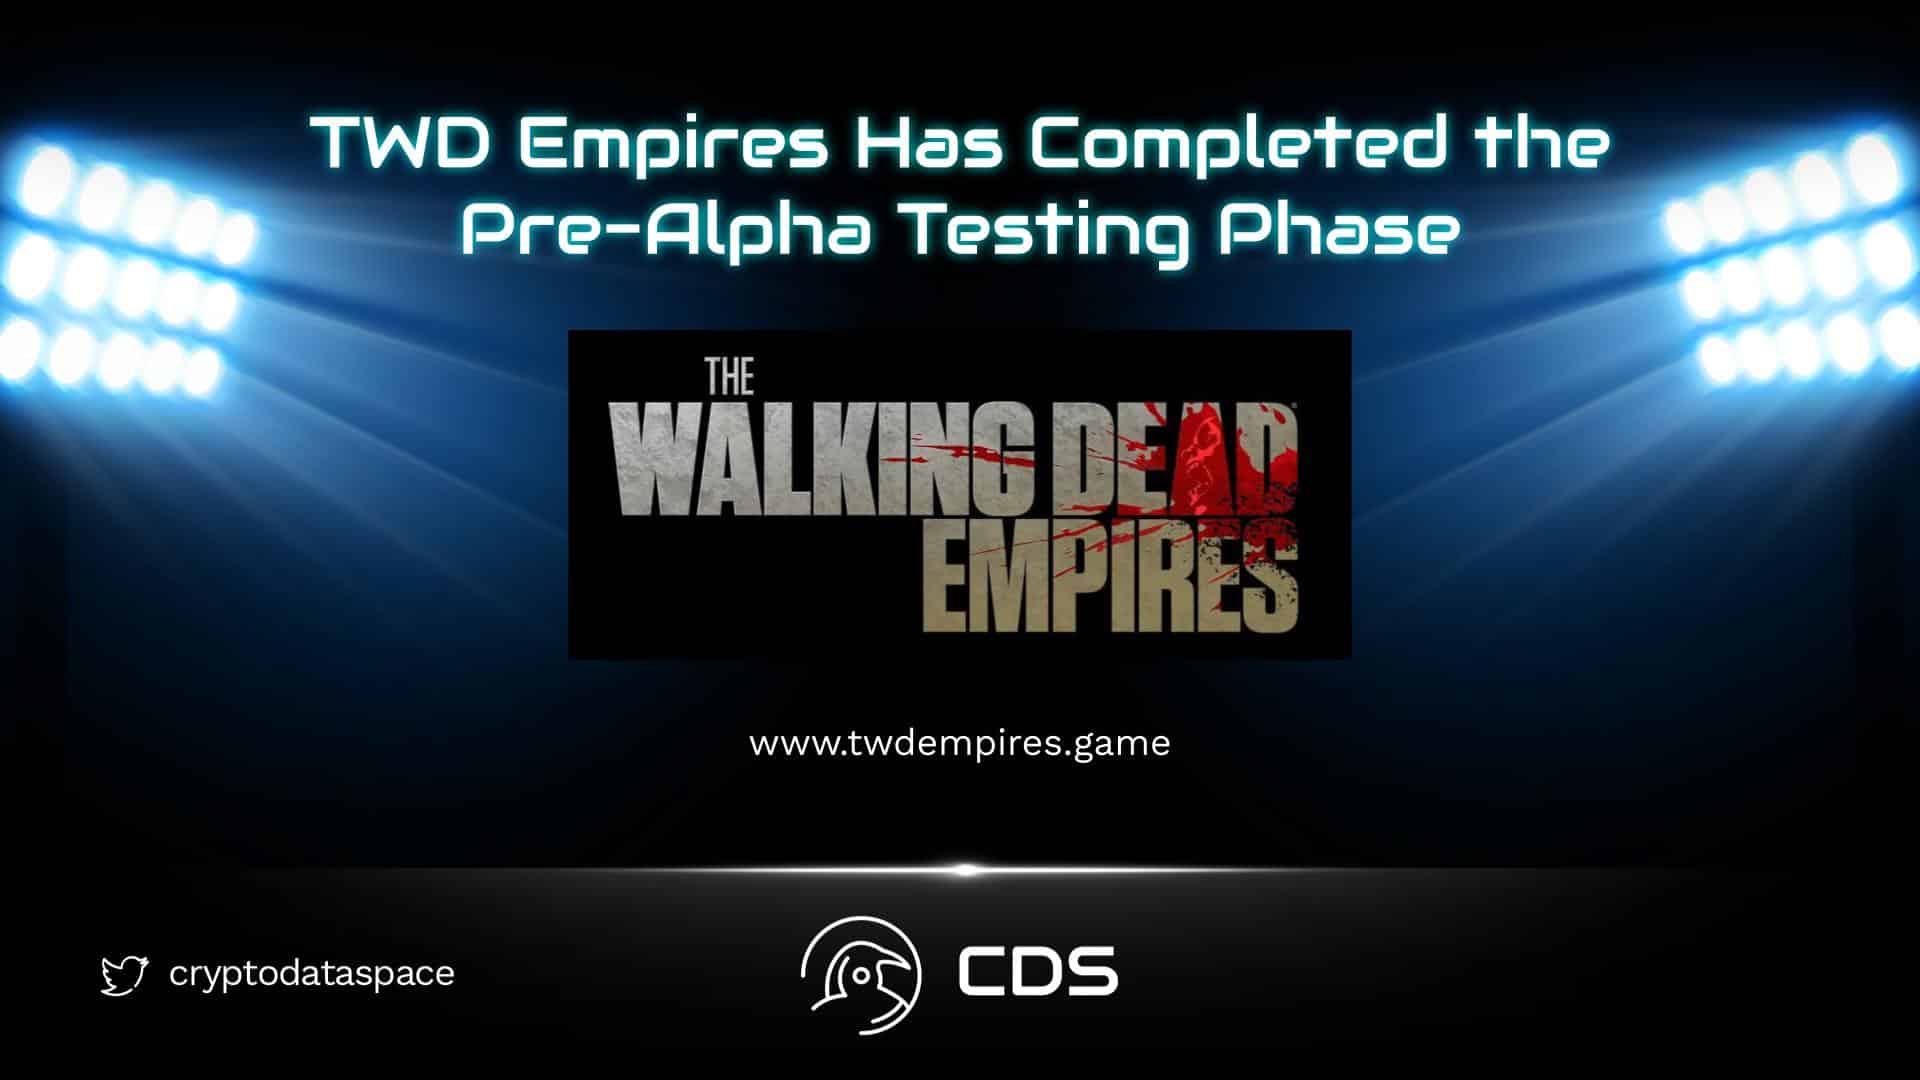 TWD Empires Has Completed the Pre-Alpha Testing Phase